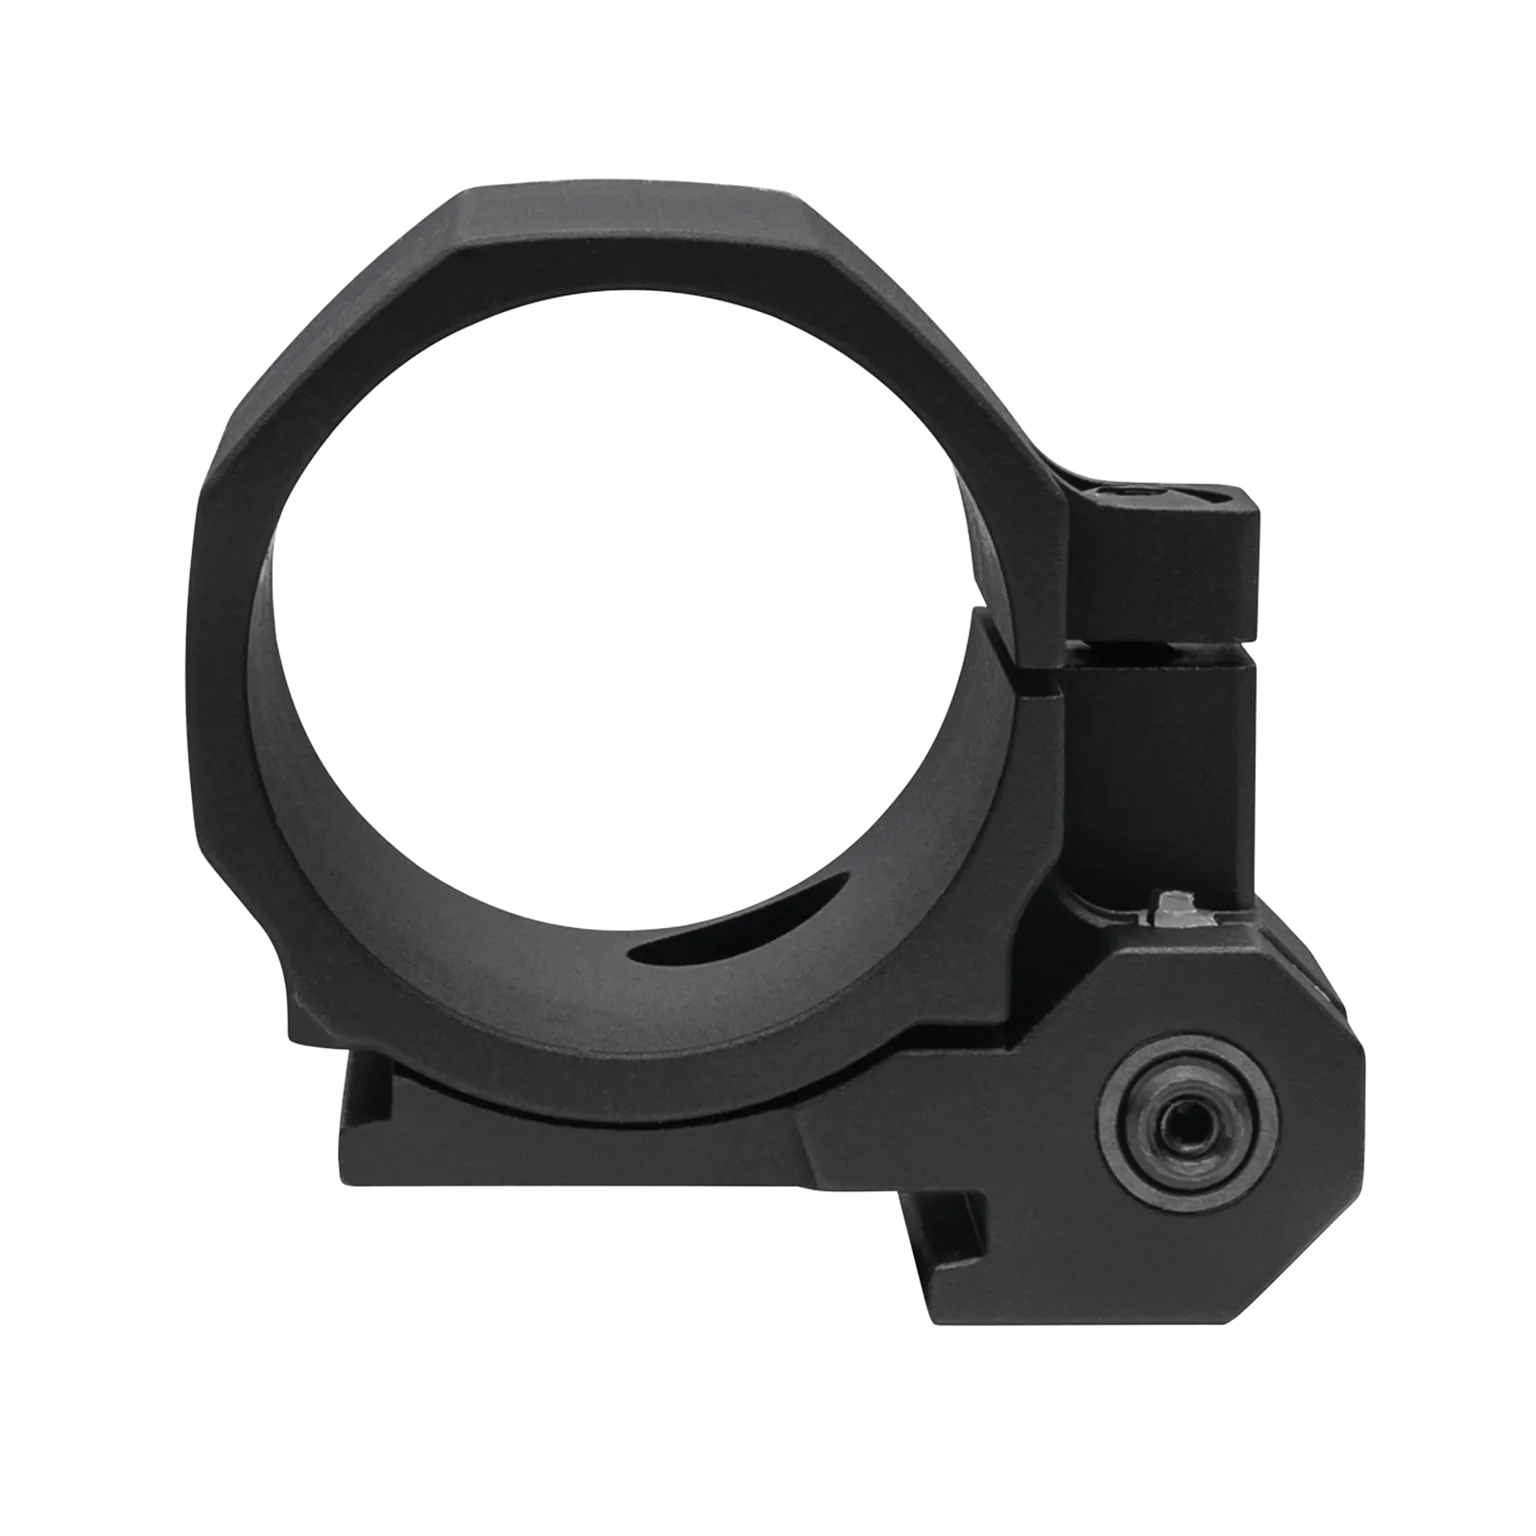 FlipMount™ 30 mm - Top Ring Ring only - requires TwistMount™ base  - 4